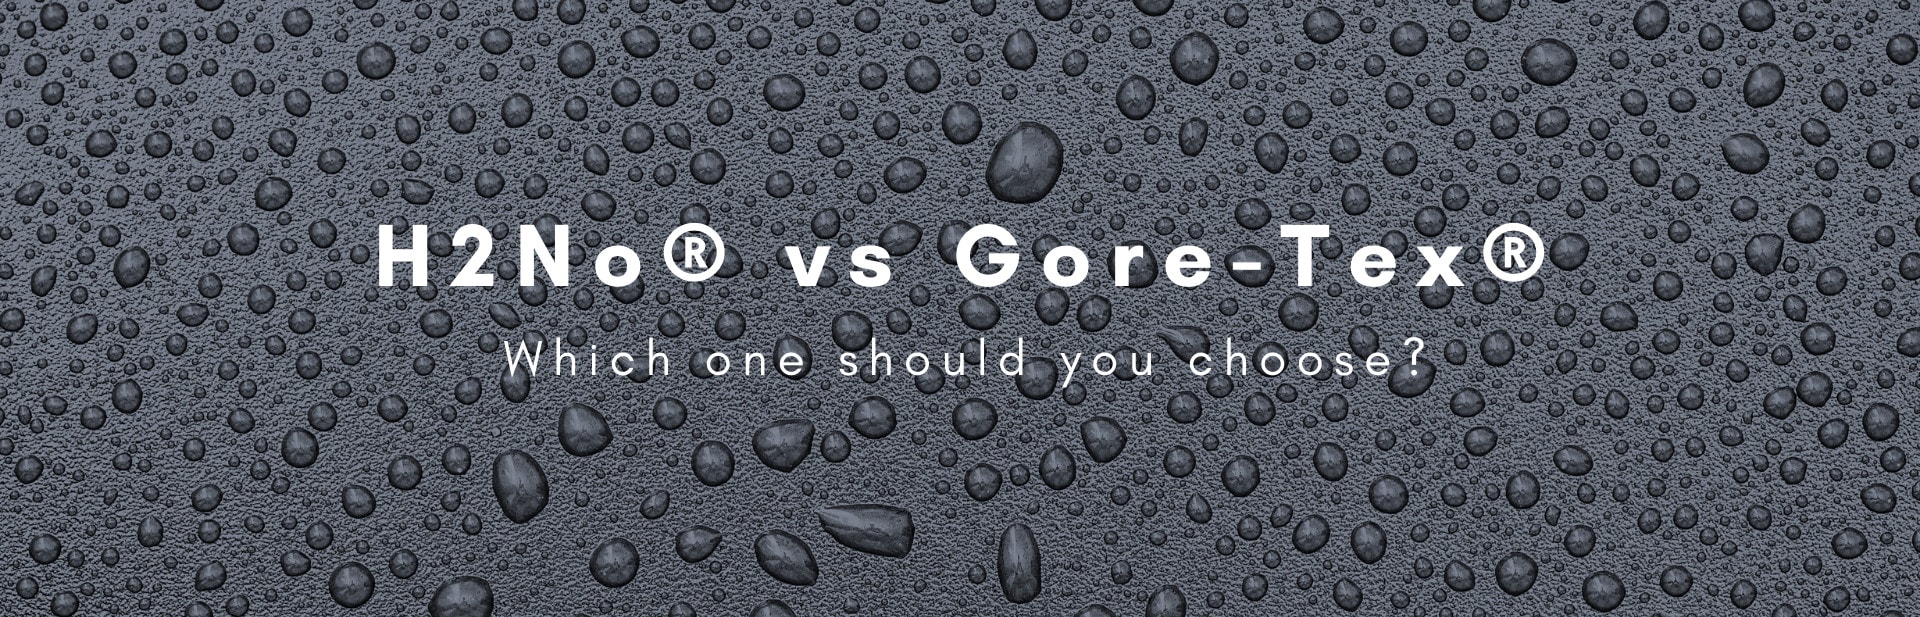 H2No® vs. Gore-Tex®: Which one should you choose?